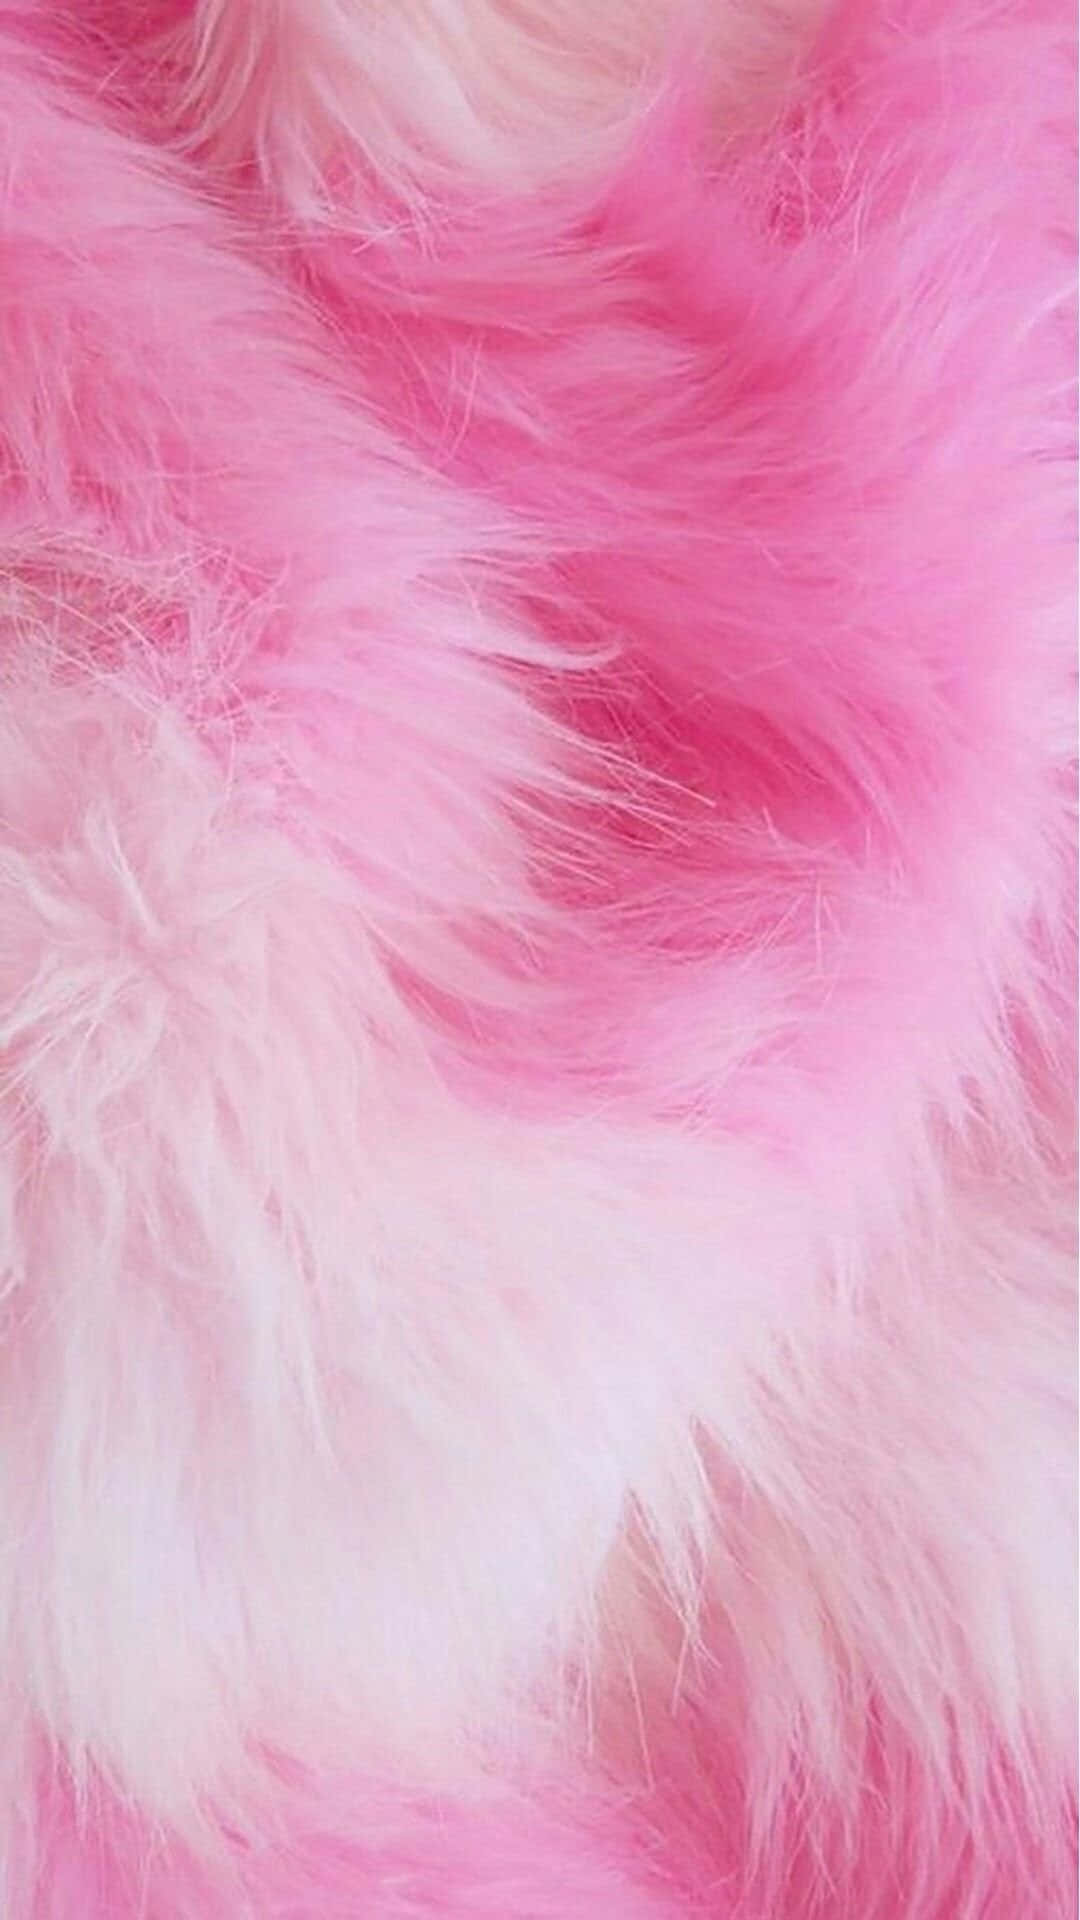 Pink And White Furry Fabric Wallpaper